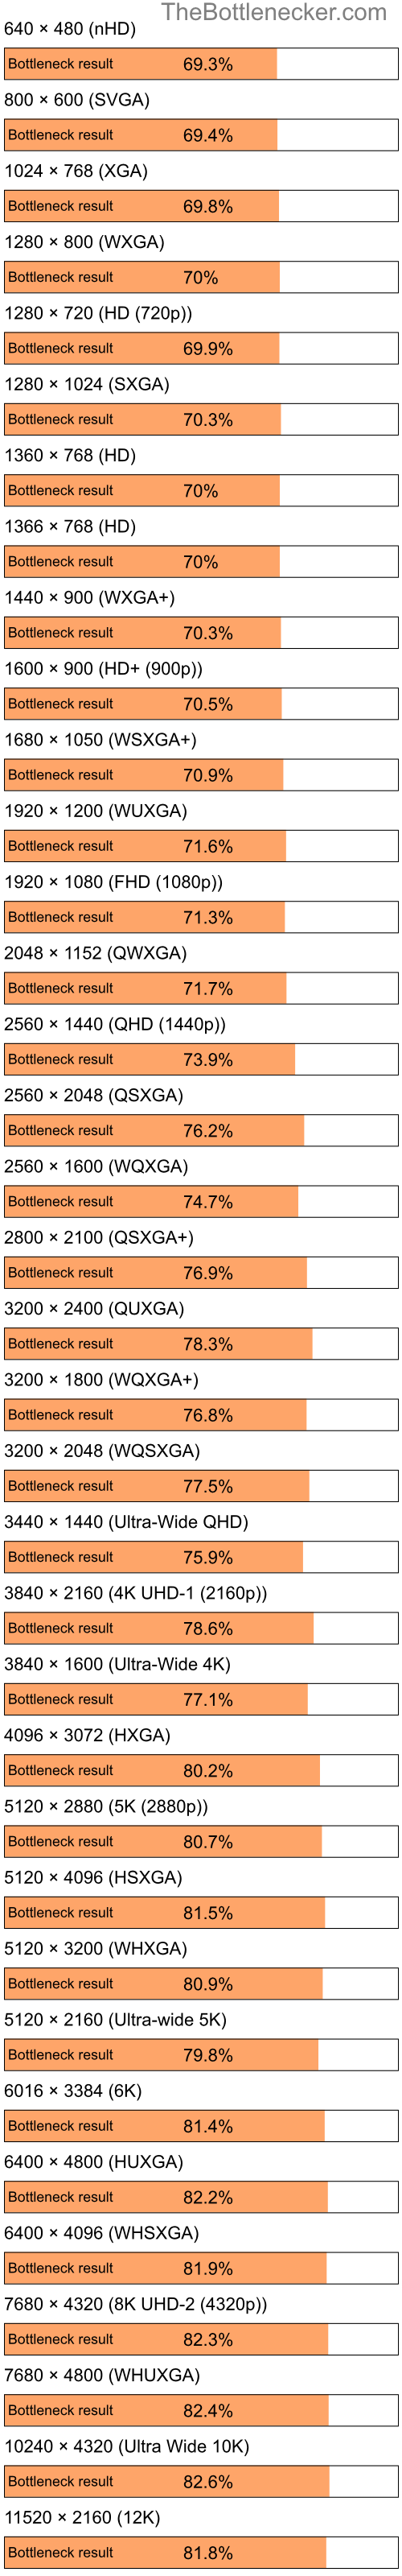 Bottleneck results by resolution for Intel Celeron M and AMD Mobility Radeon HD 2400 XT in Graphic Card Intense Tasks